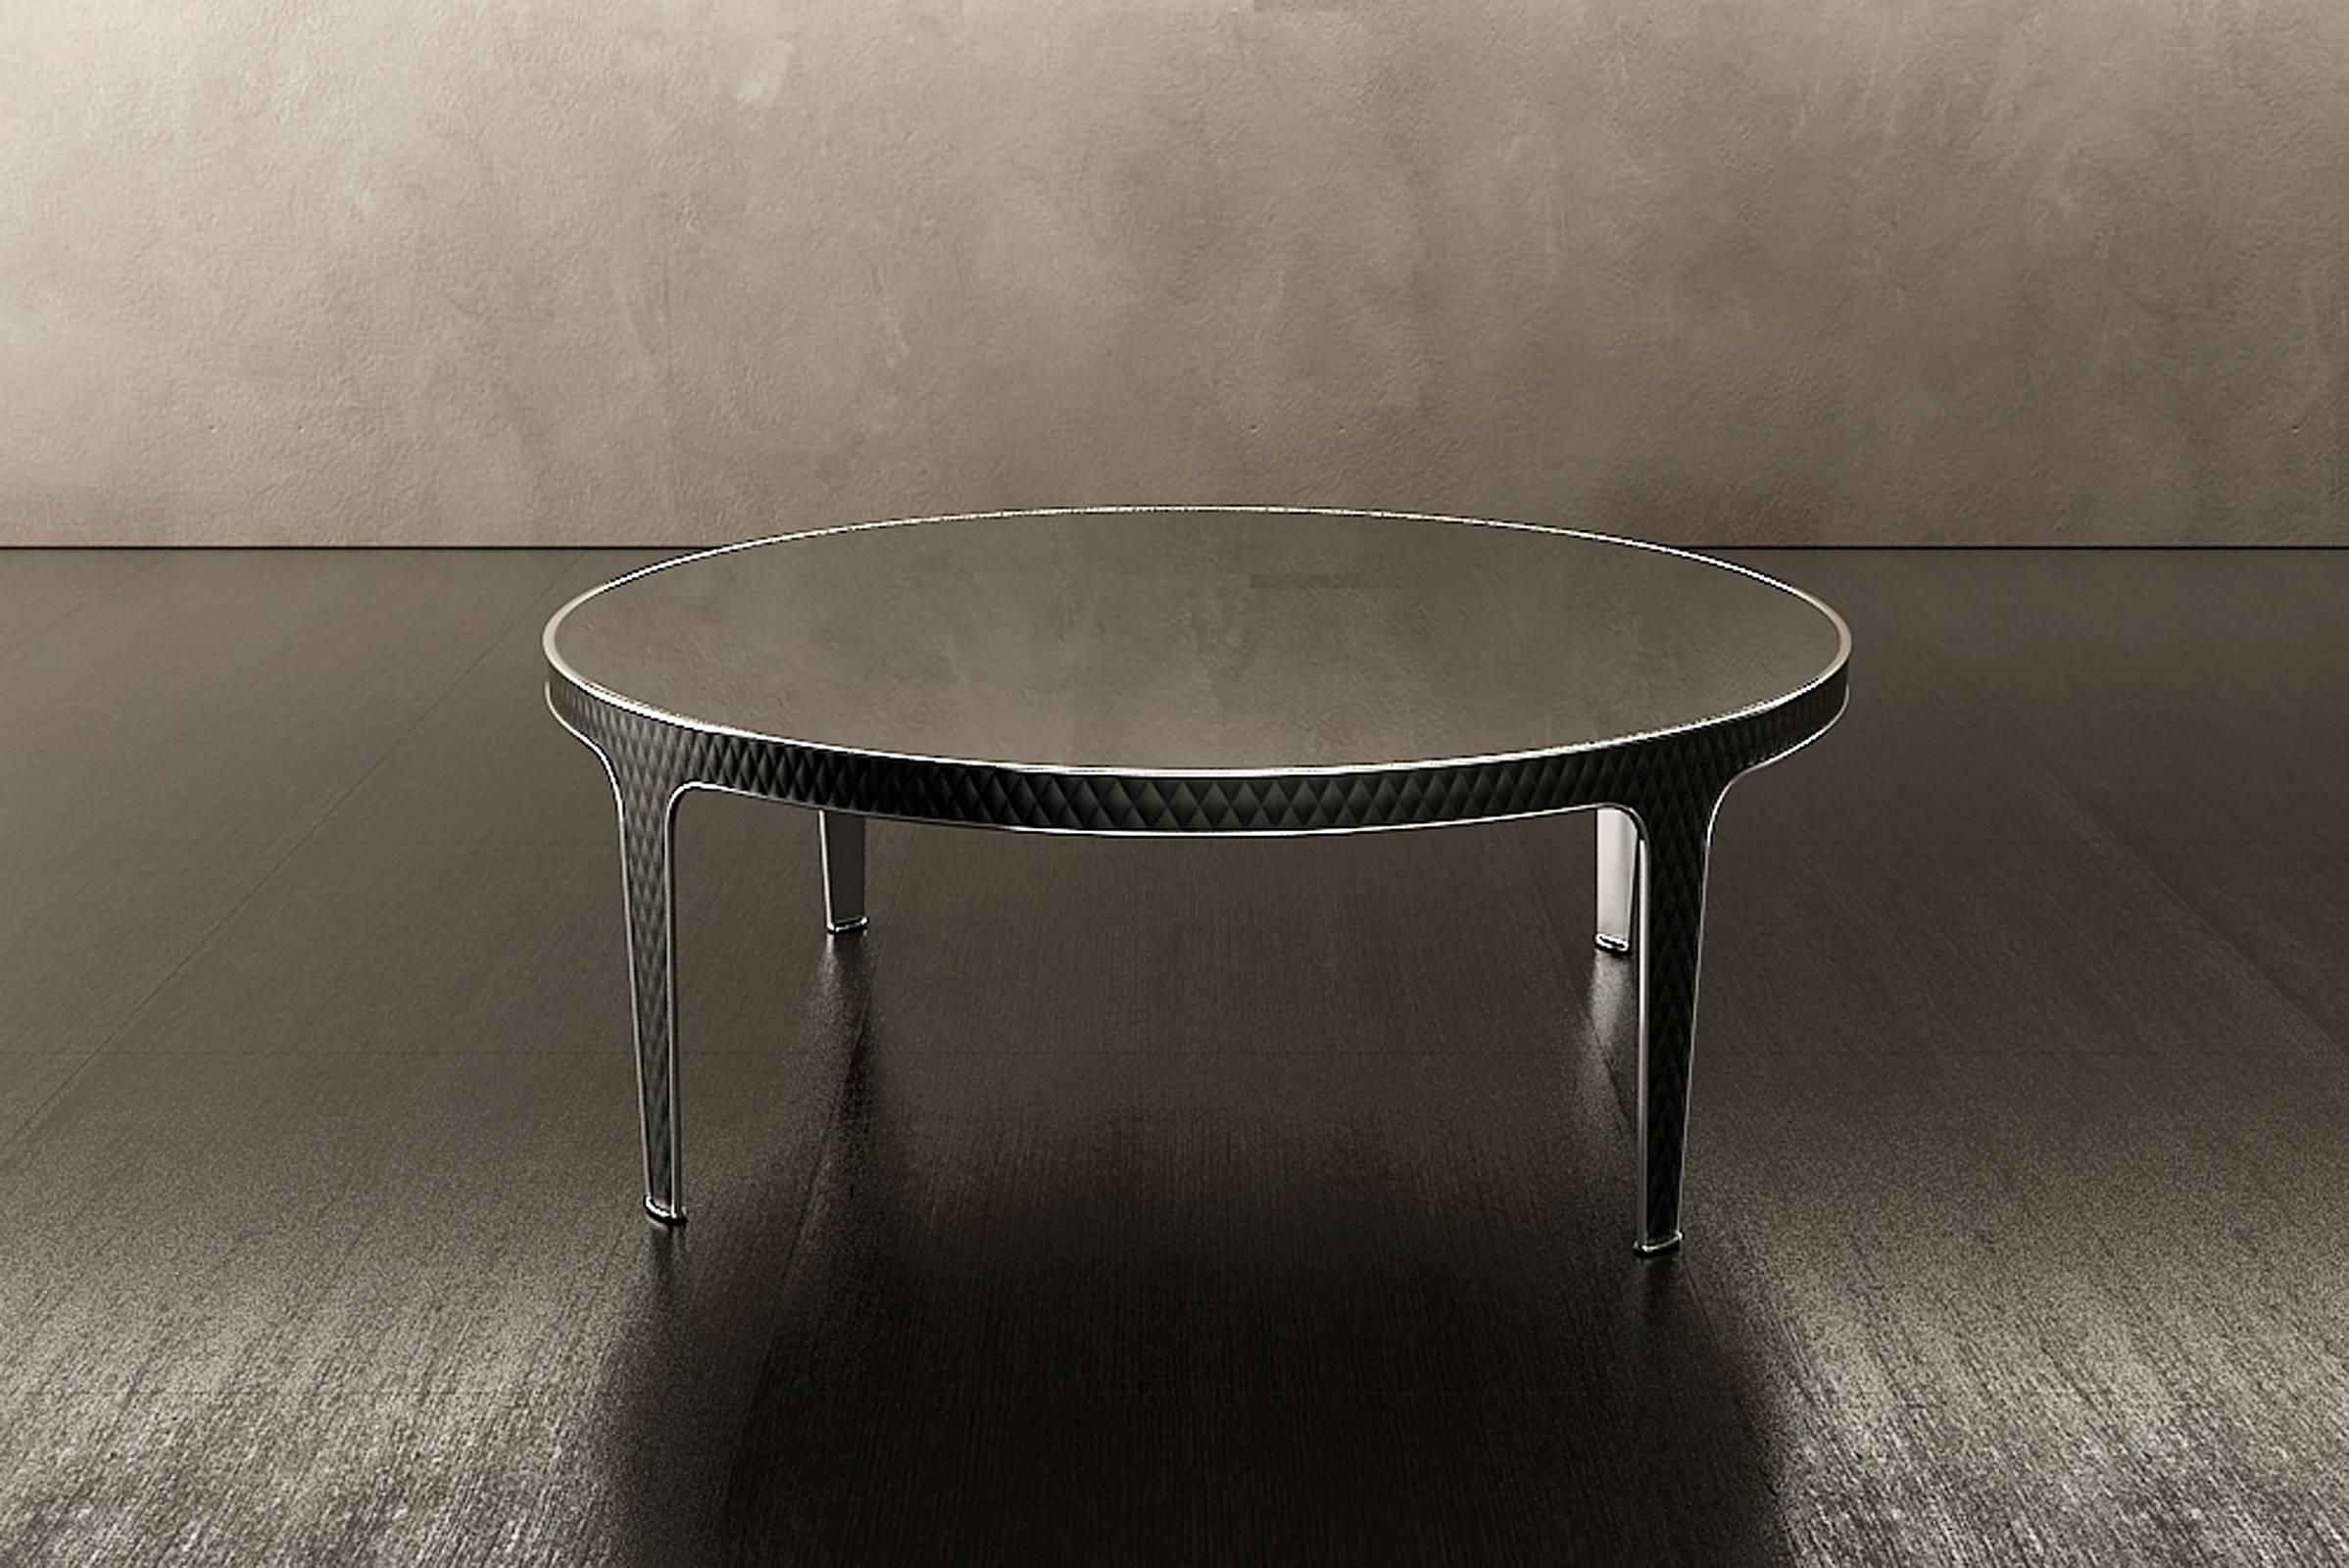 Round coffee table shadow
steel legs covered with leather category C.
Marble-top.
Table available with bronze structure
and glass or leather top.
Available with other dimensions.
